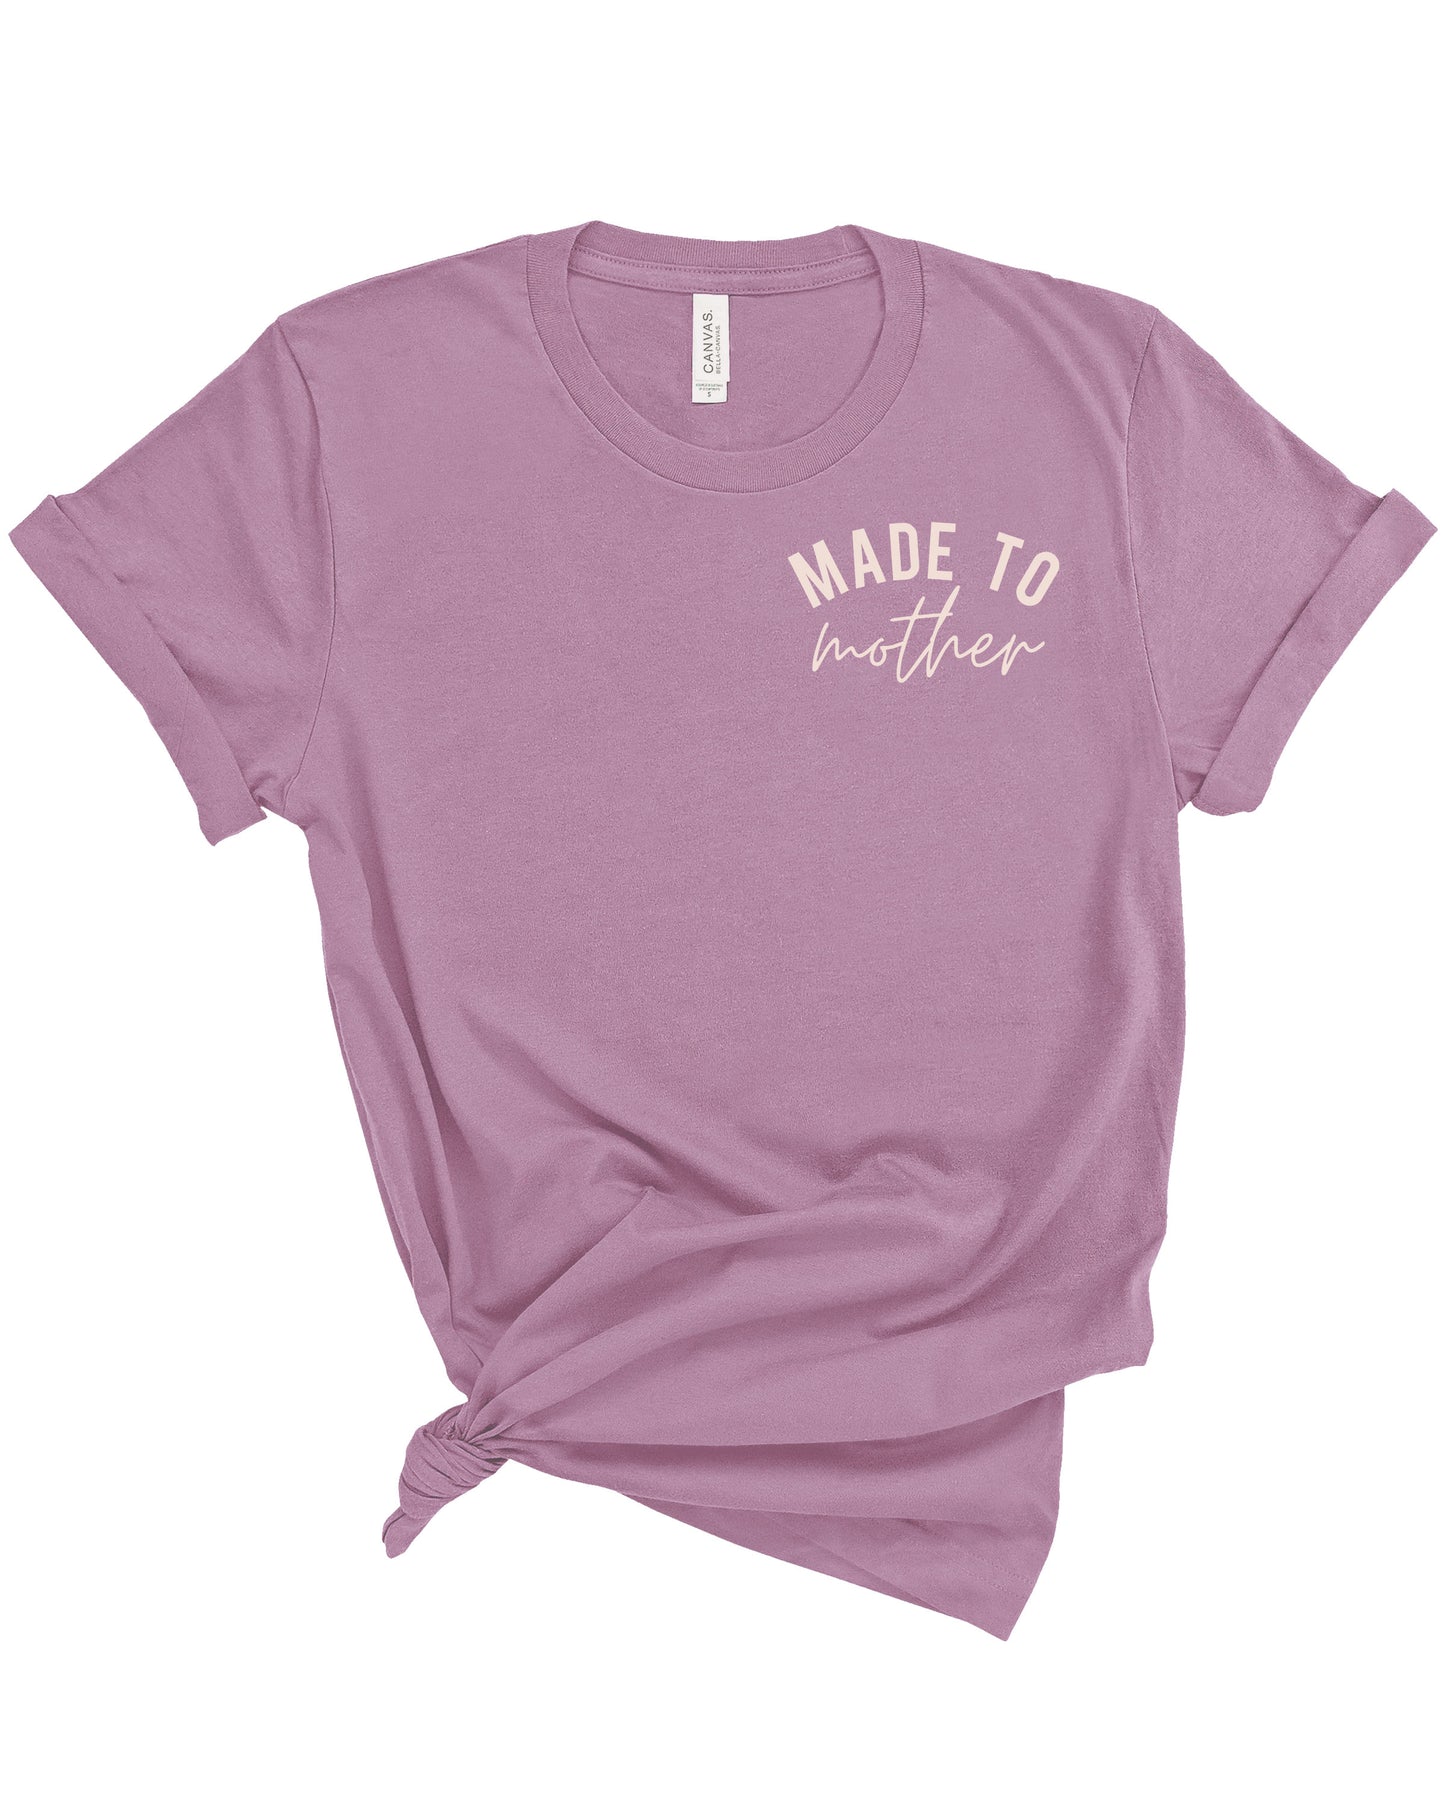 Made To Mother | Adult Tee | RTS-Sister Shirts-Sister Shirts, Cute & Custom Tees for Mama & Littles in Trussville, Alabama.